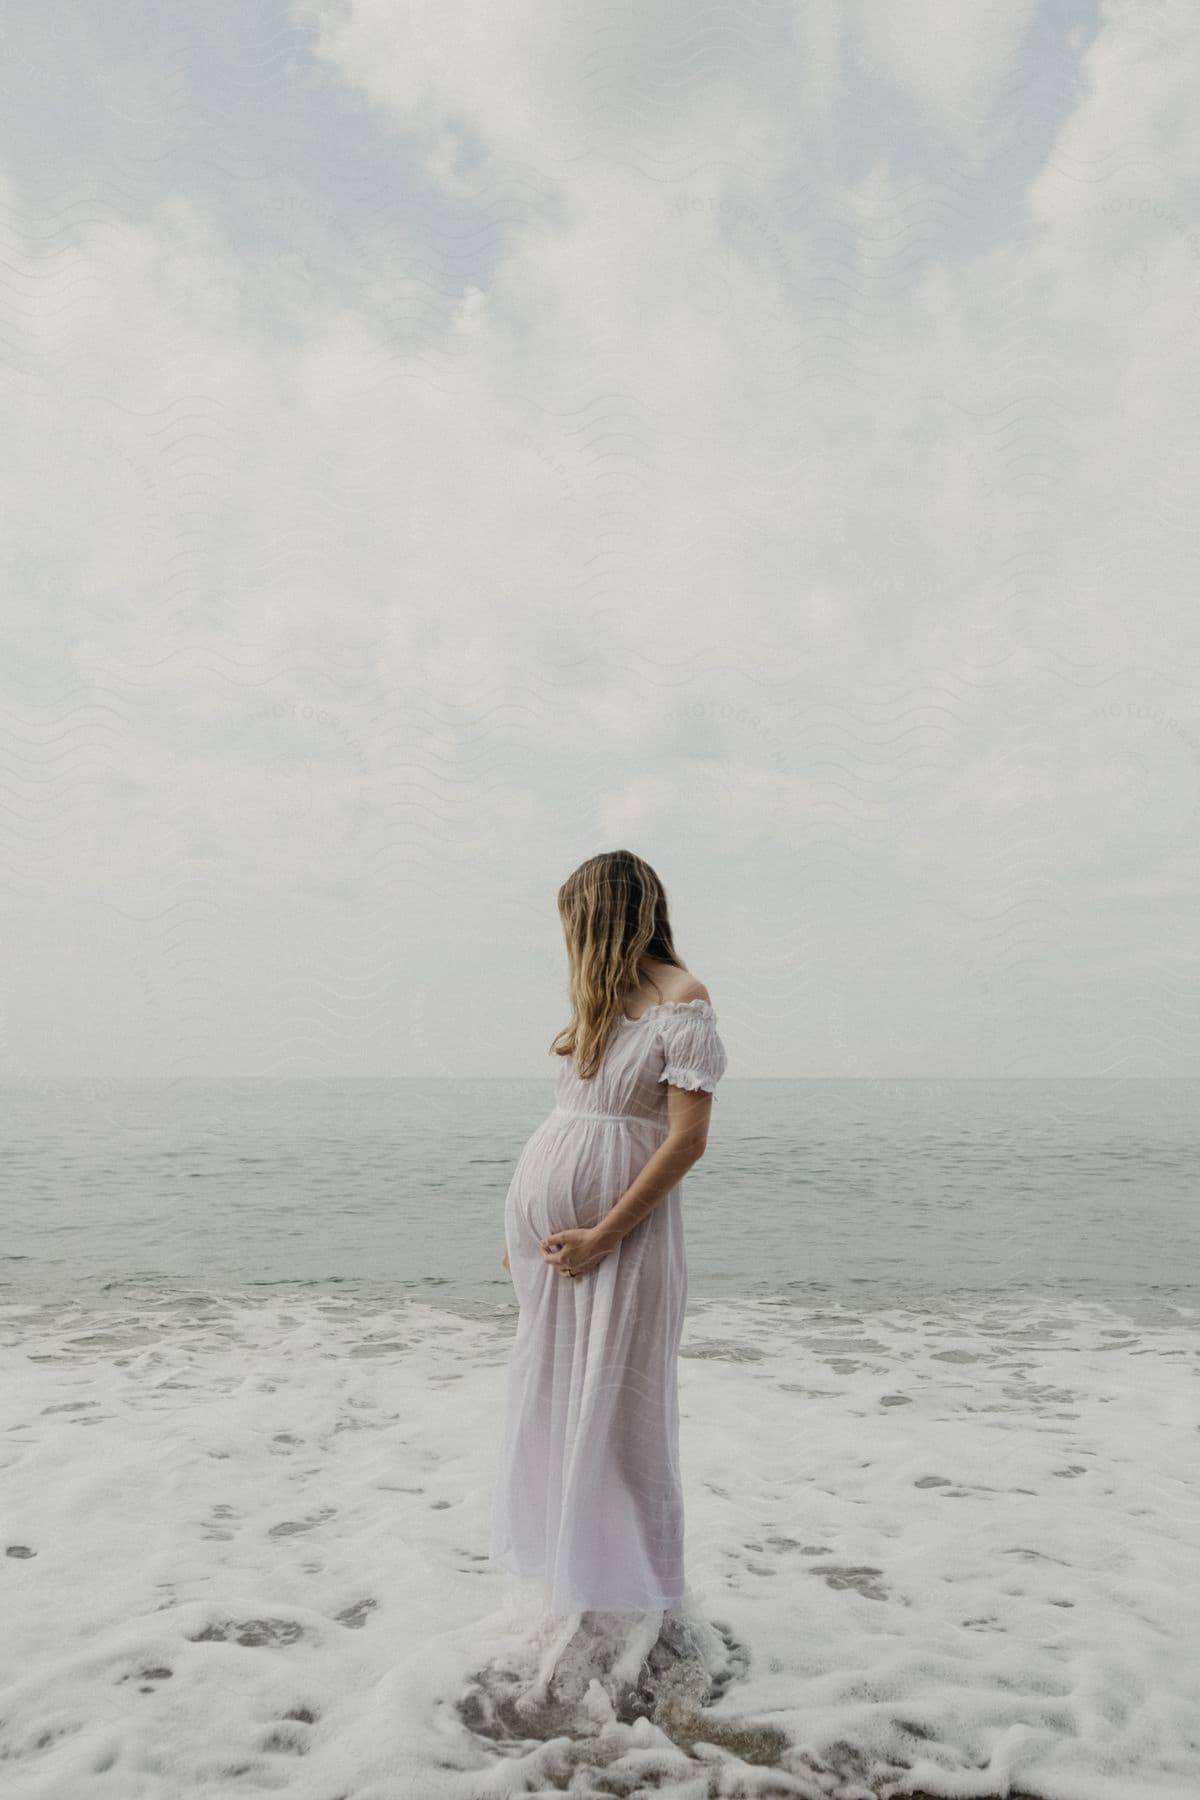 Pregnant woman in a white dress standing by the sea.